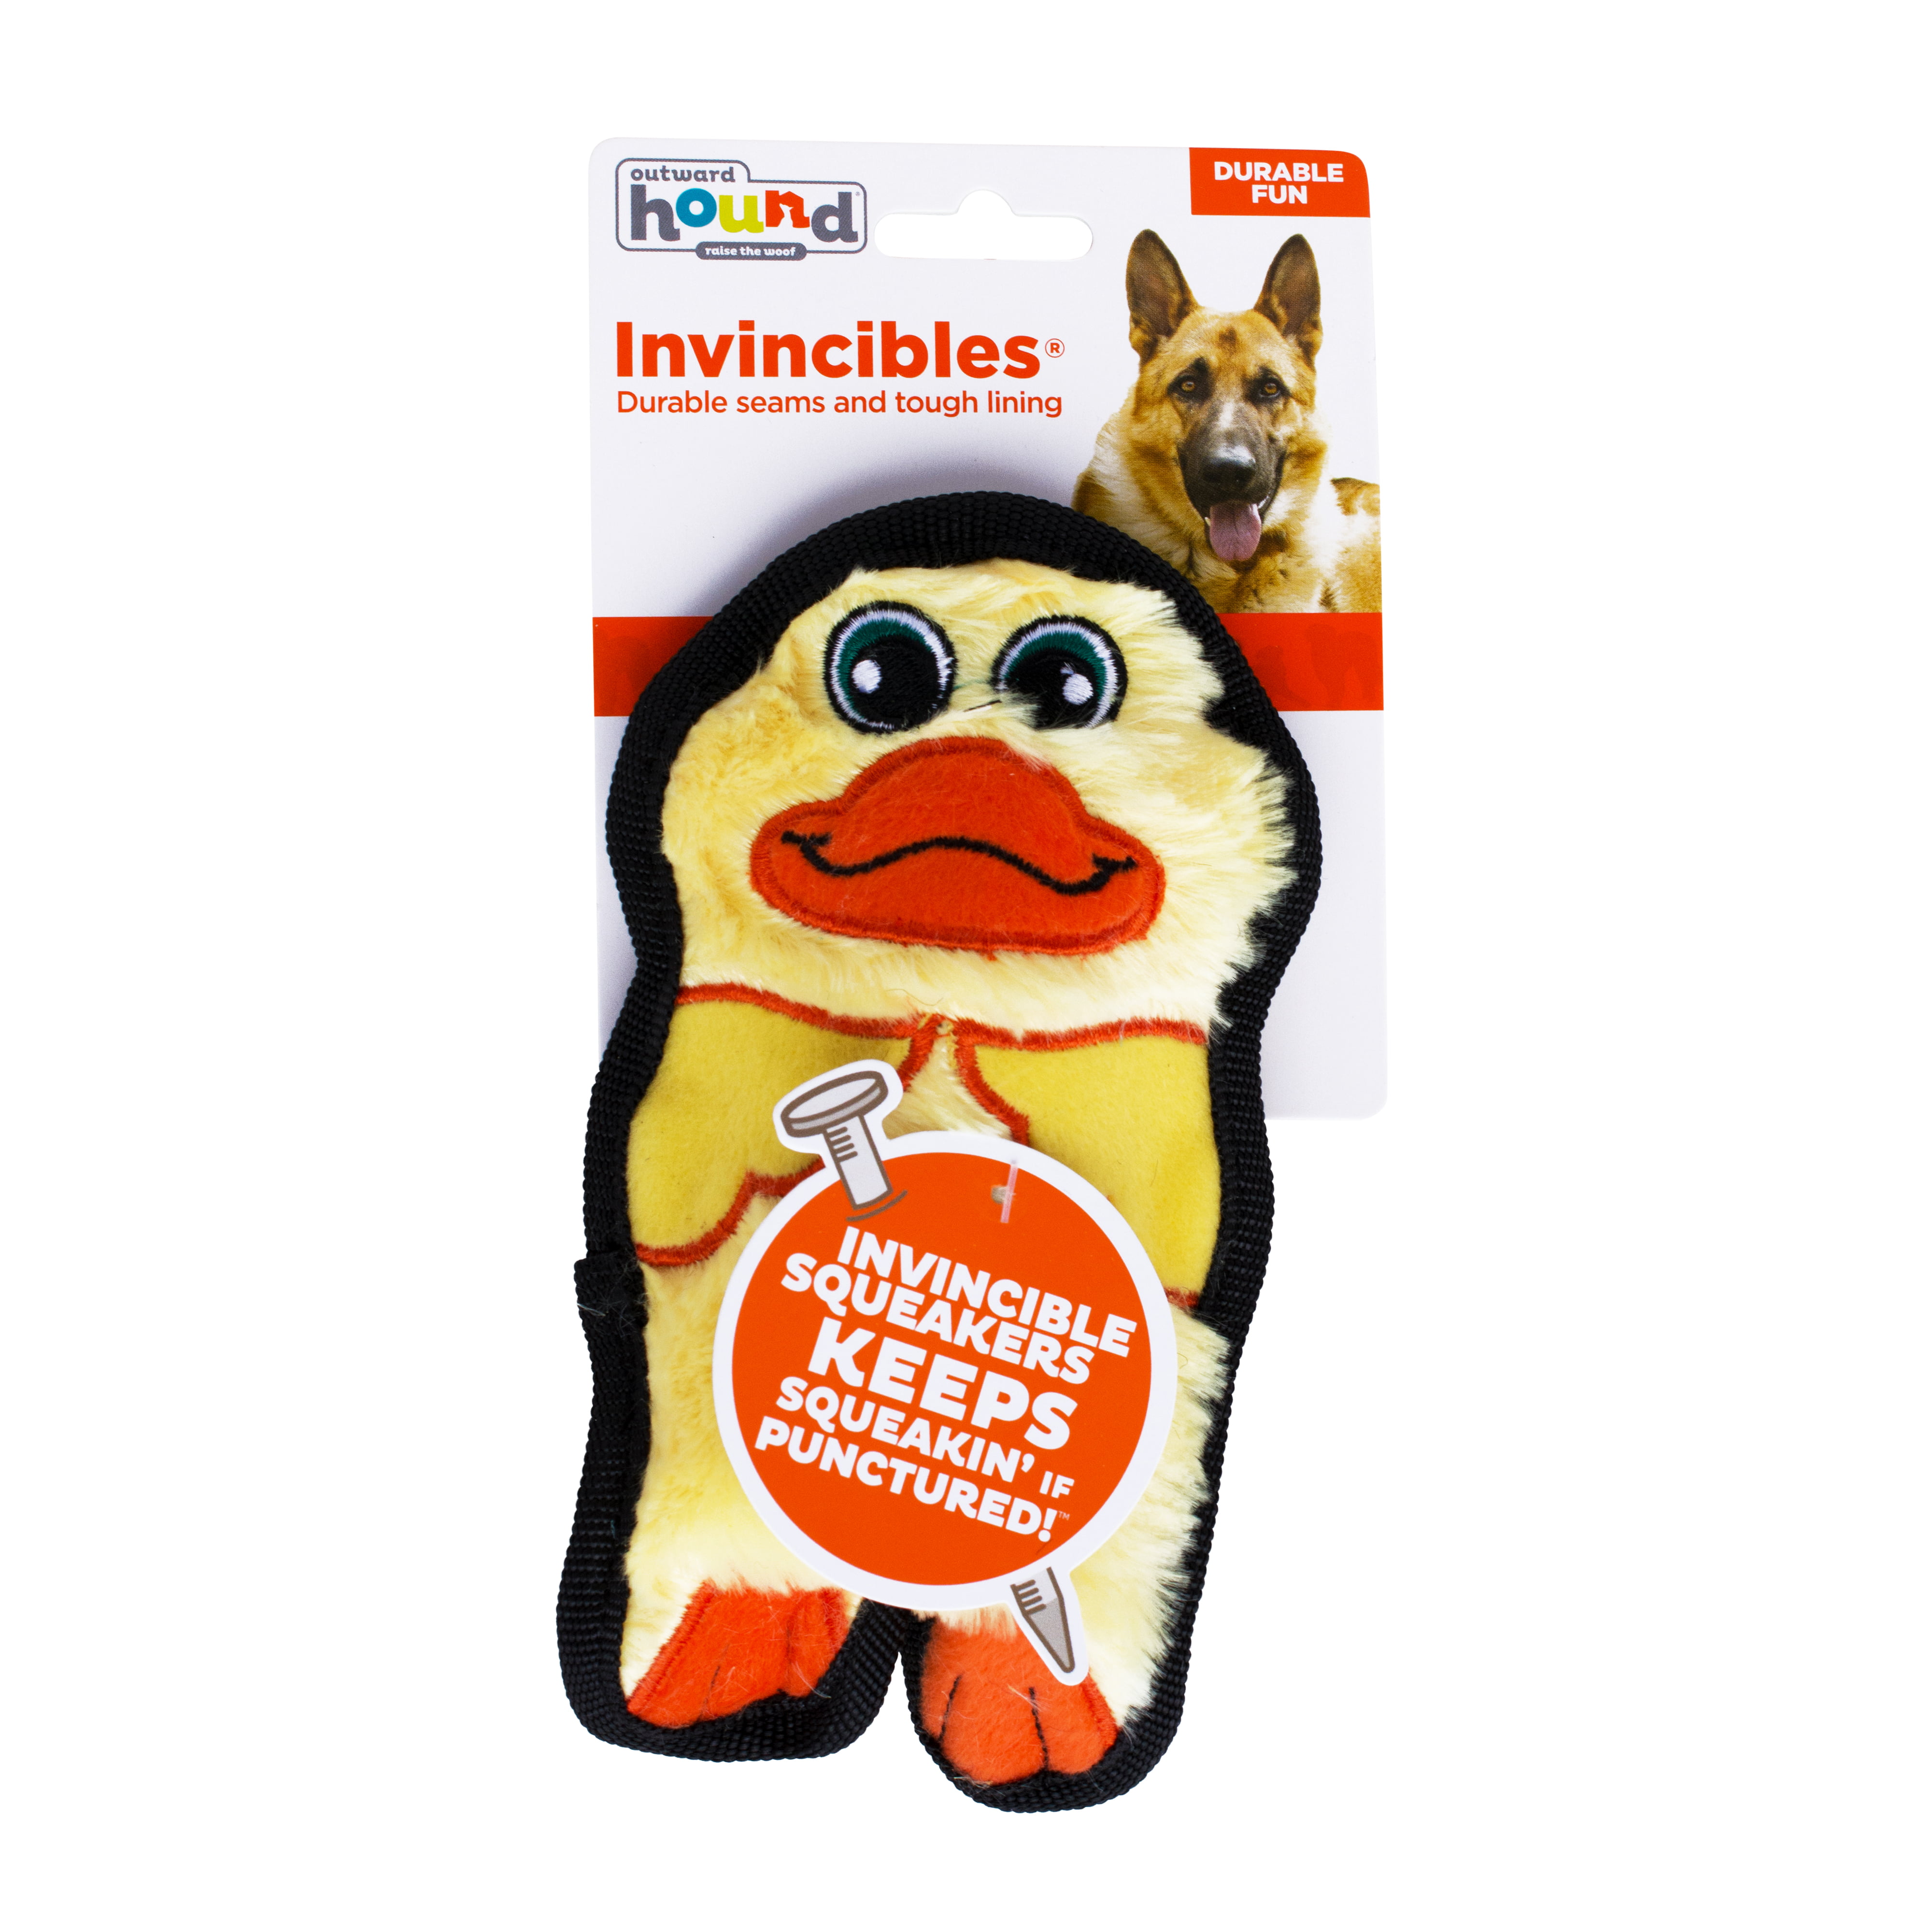 4 pc. Multi-Pack) Outward Hound Invincibles Plush Stuffing-less